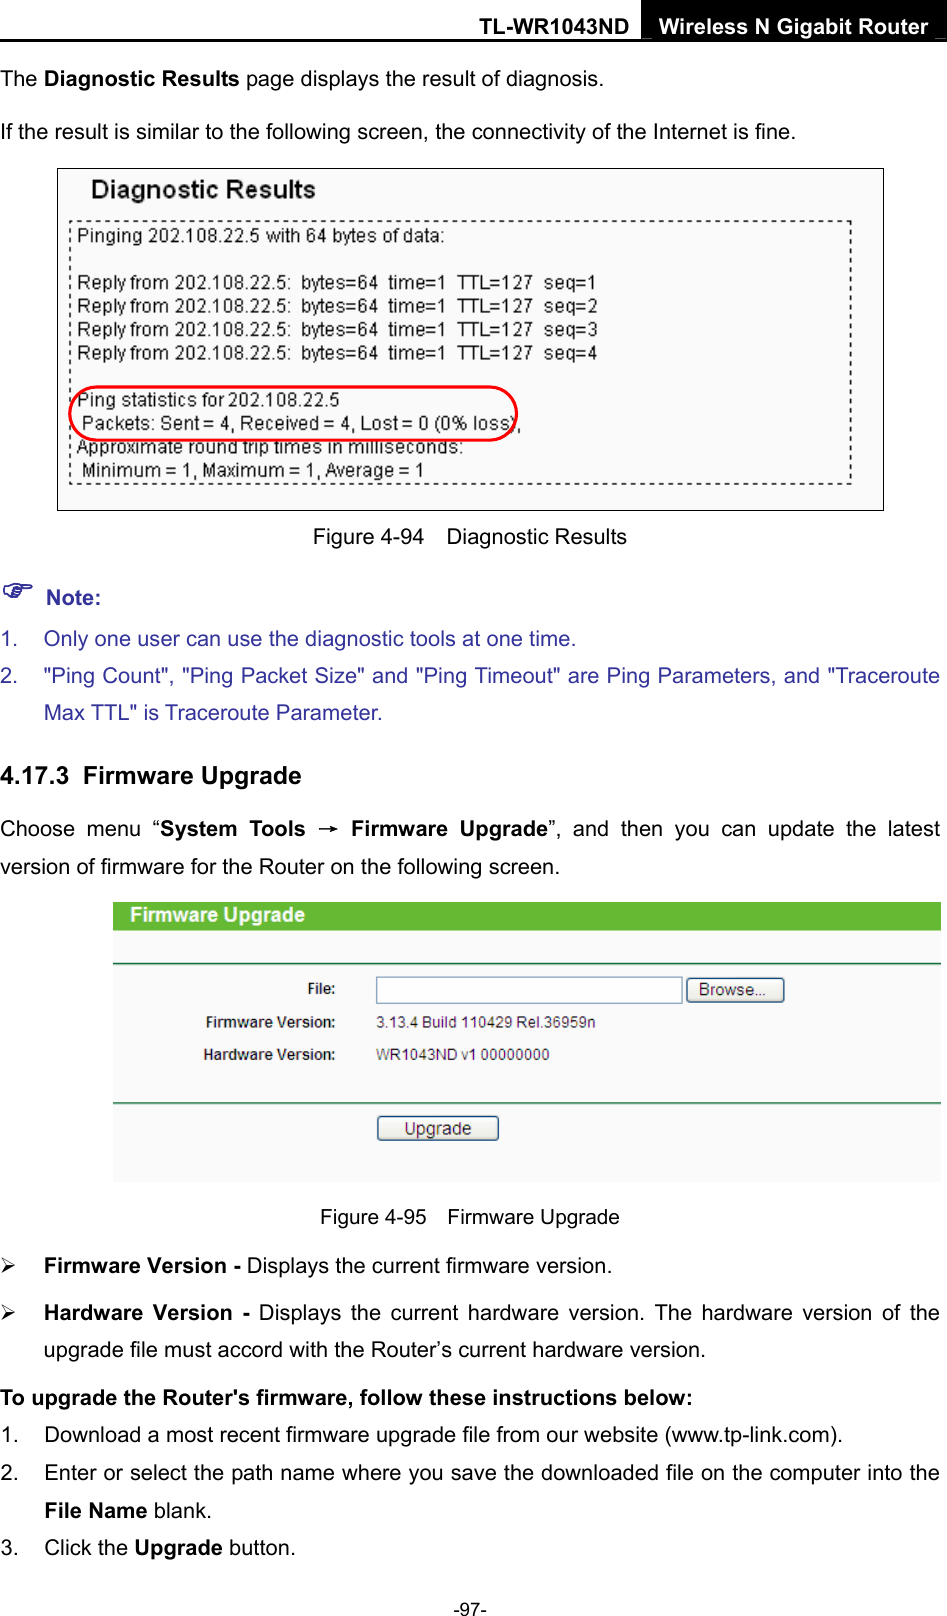 TL-WR1043ND Wireless N Gigabit Router  -97- The Diagnostic Results page displays the result of diagnosis. If the result is similar to the following screen, the connectivity of the Internet is fine.  Figure 4-94  Diagnostic Results ) Note: 1.  Only one user can use the diagnostic tools at one time.   2.  &quot;Ping Count&quot;, &quot;Ping Packet Size&quot; and &quot;Ping Timeout&quot; are Ping Parameters, and &quot;Traceroute Max TTL&quot; is Traceroute Parameter.   4.17.3  Firmware Upgrade Choose menu “System Tools → Firmware Upgrade”, and then you can update the latest version of firmware for the Router on the following screen.  Figure 4-95  Firmware Upgrade ¾ Firmware Version - Displays the current firmware version. ¾ Hardware Version - Displays the current hardware version. The hardware version of the upgrade file must accord with the Router’s current hardware version. To upgrade the Router&apos;s firmware, follow these instructions below: 1.  Download a most recent firmware upgrade file from our website (www.tp-link.com).   2.  Enter or select the path name where you save the downloaded file on the computer into the File Name blank.   3. Click the Upgrade button.   